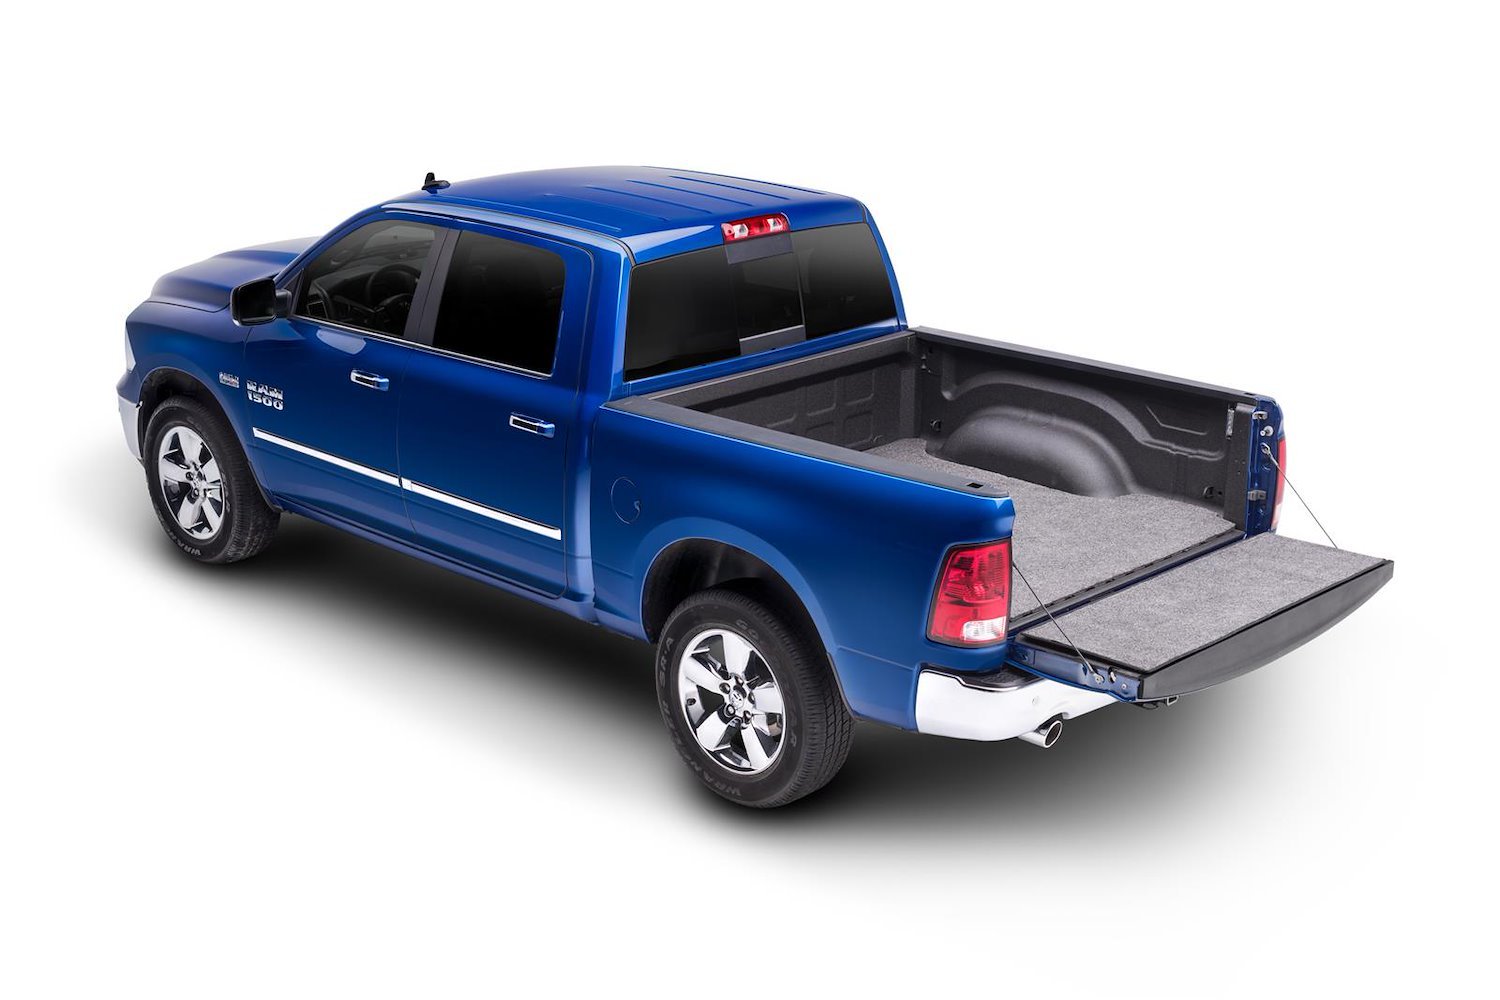 Mat Non-Liner/Spray-In Style 2002-2013 Dodge Ram